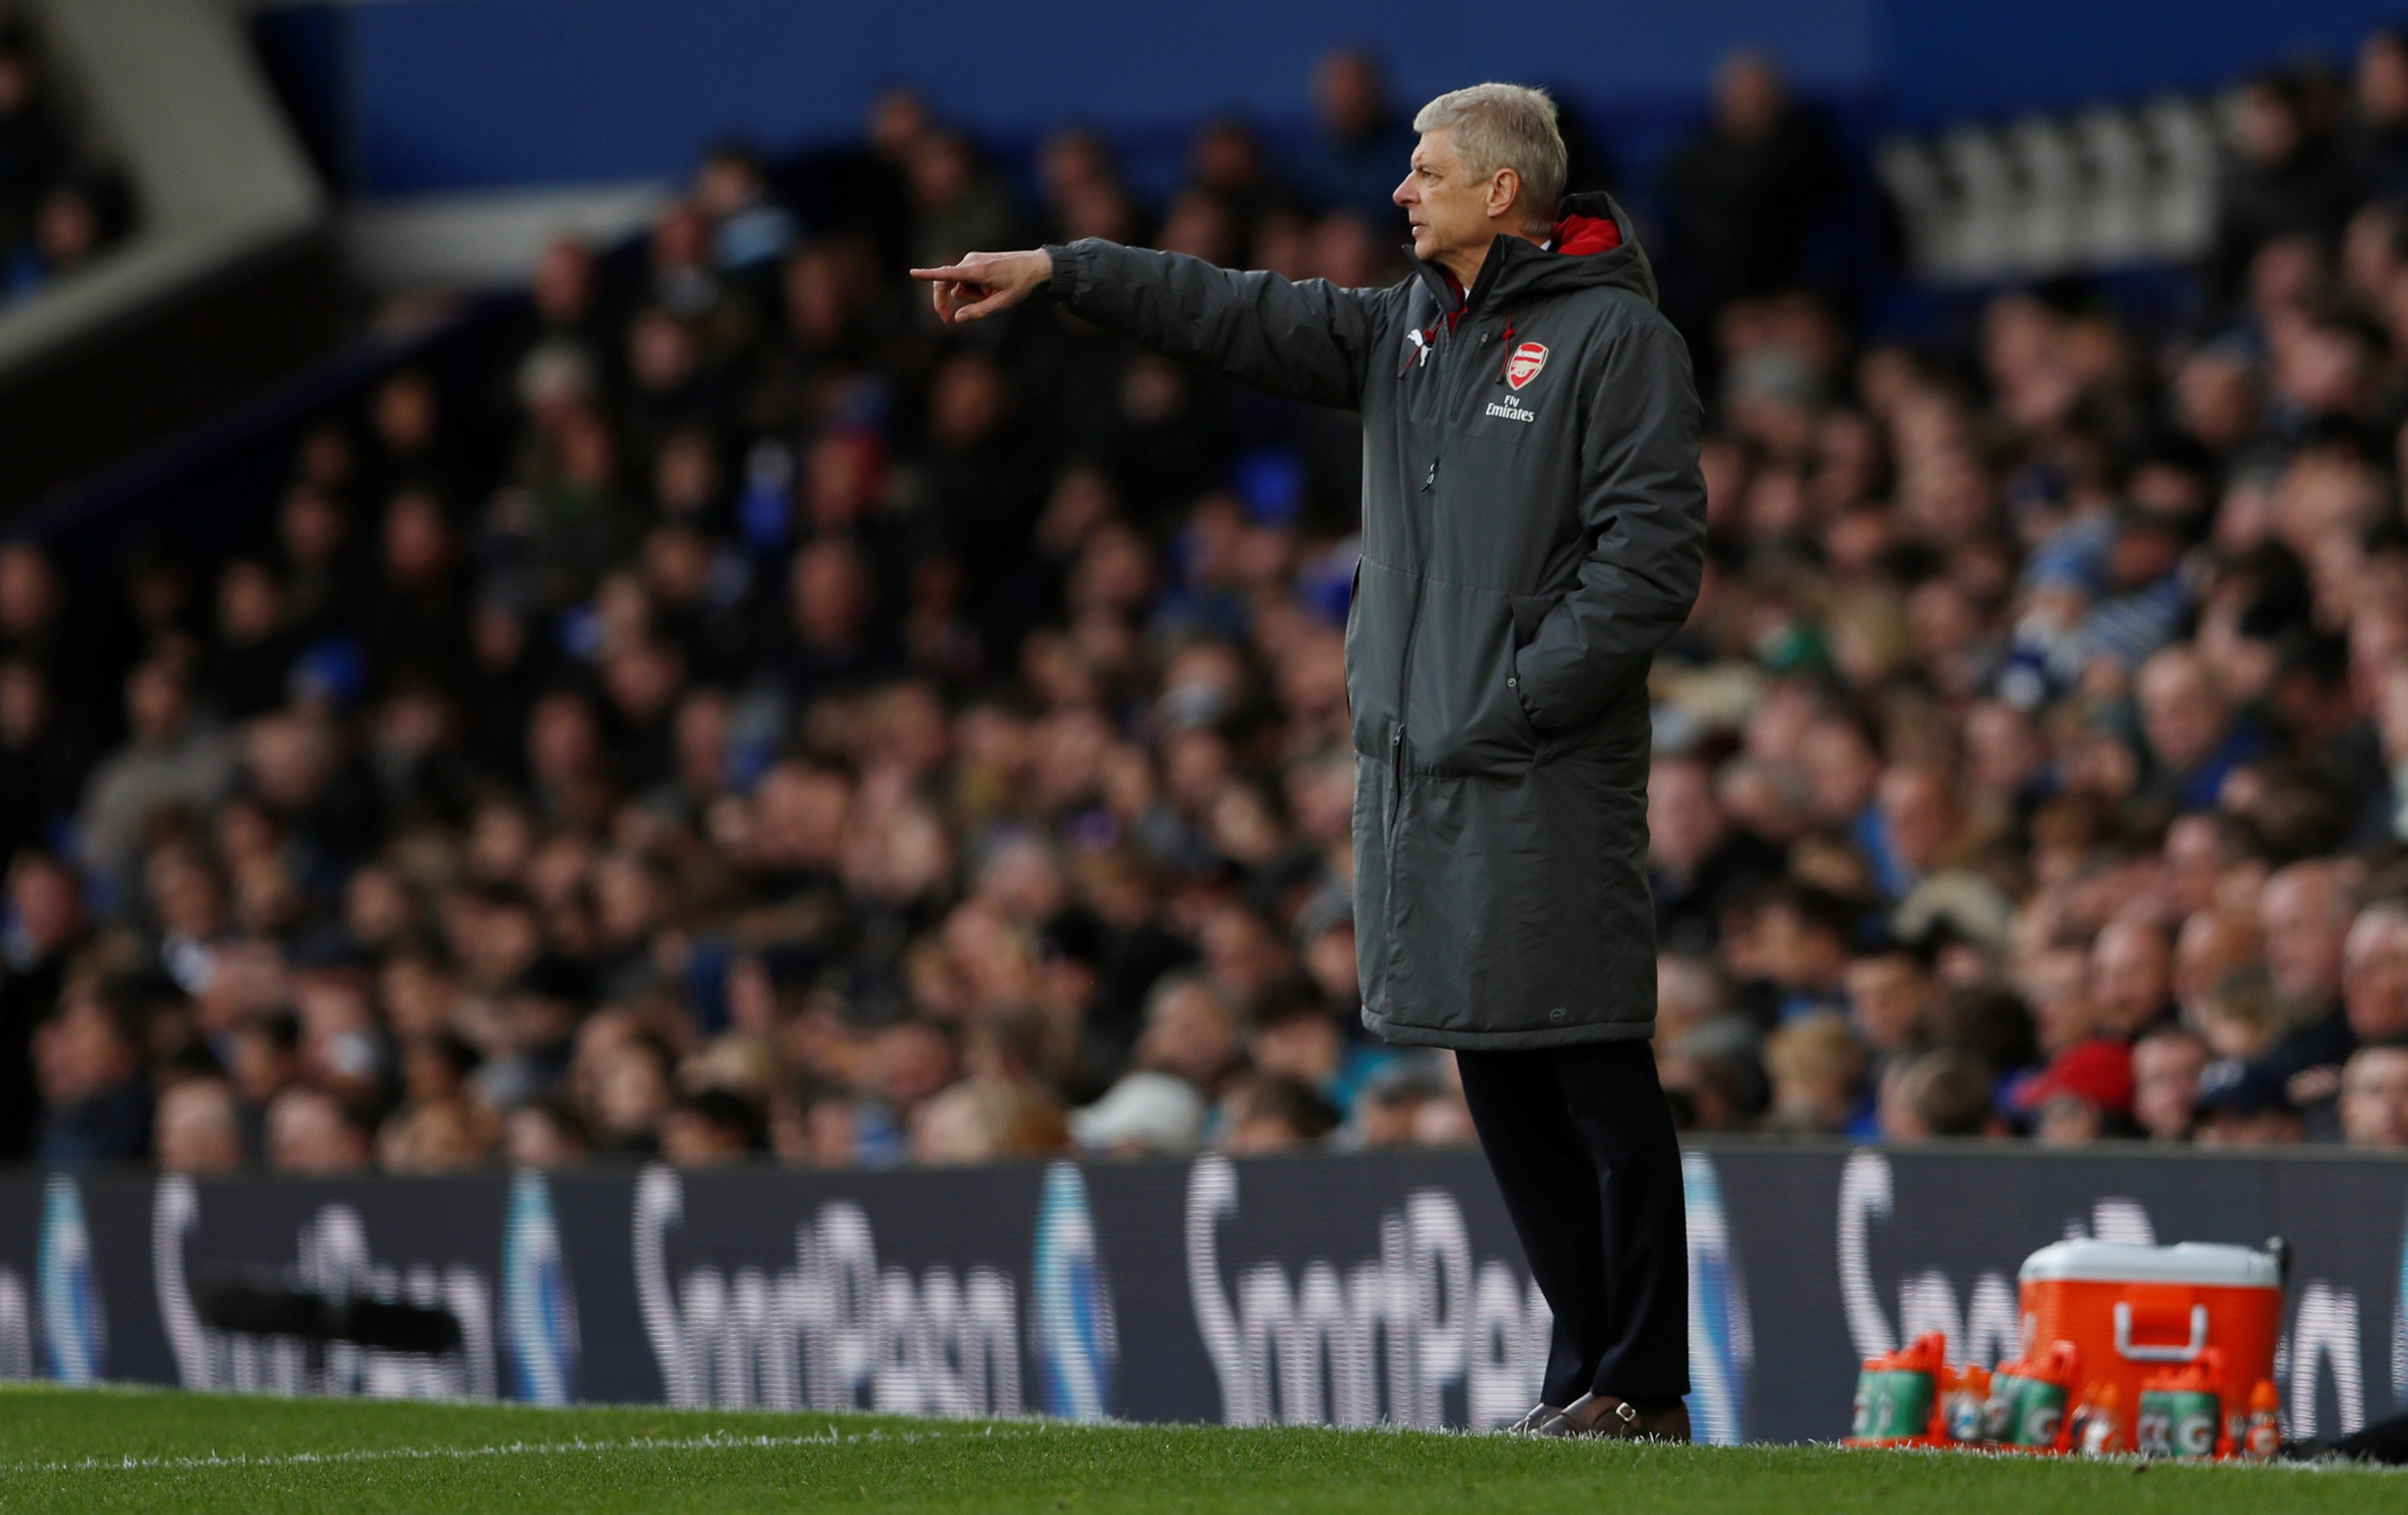 Football: Attacking riches will help Arsenal challenge on all fronts, says Wenger